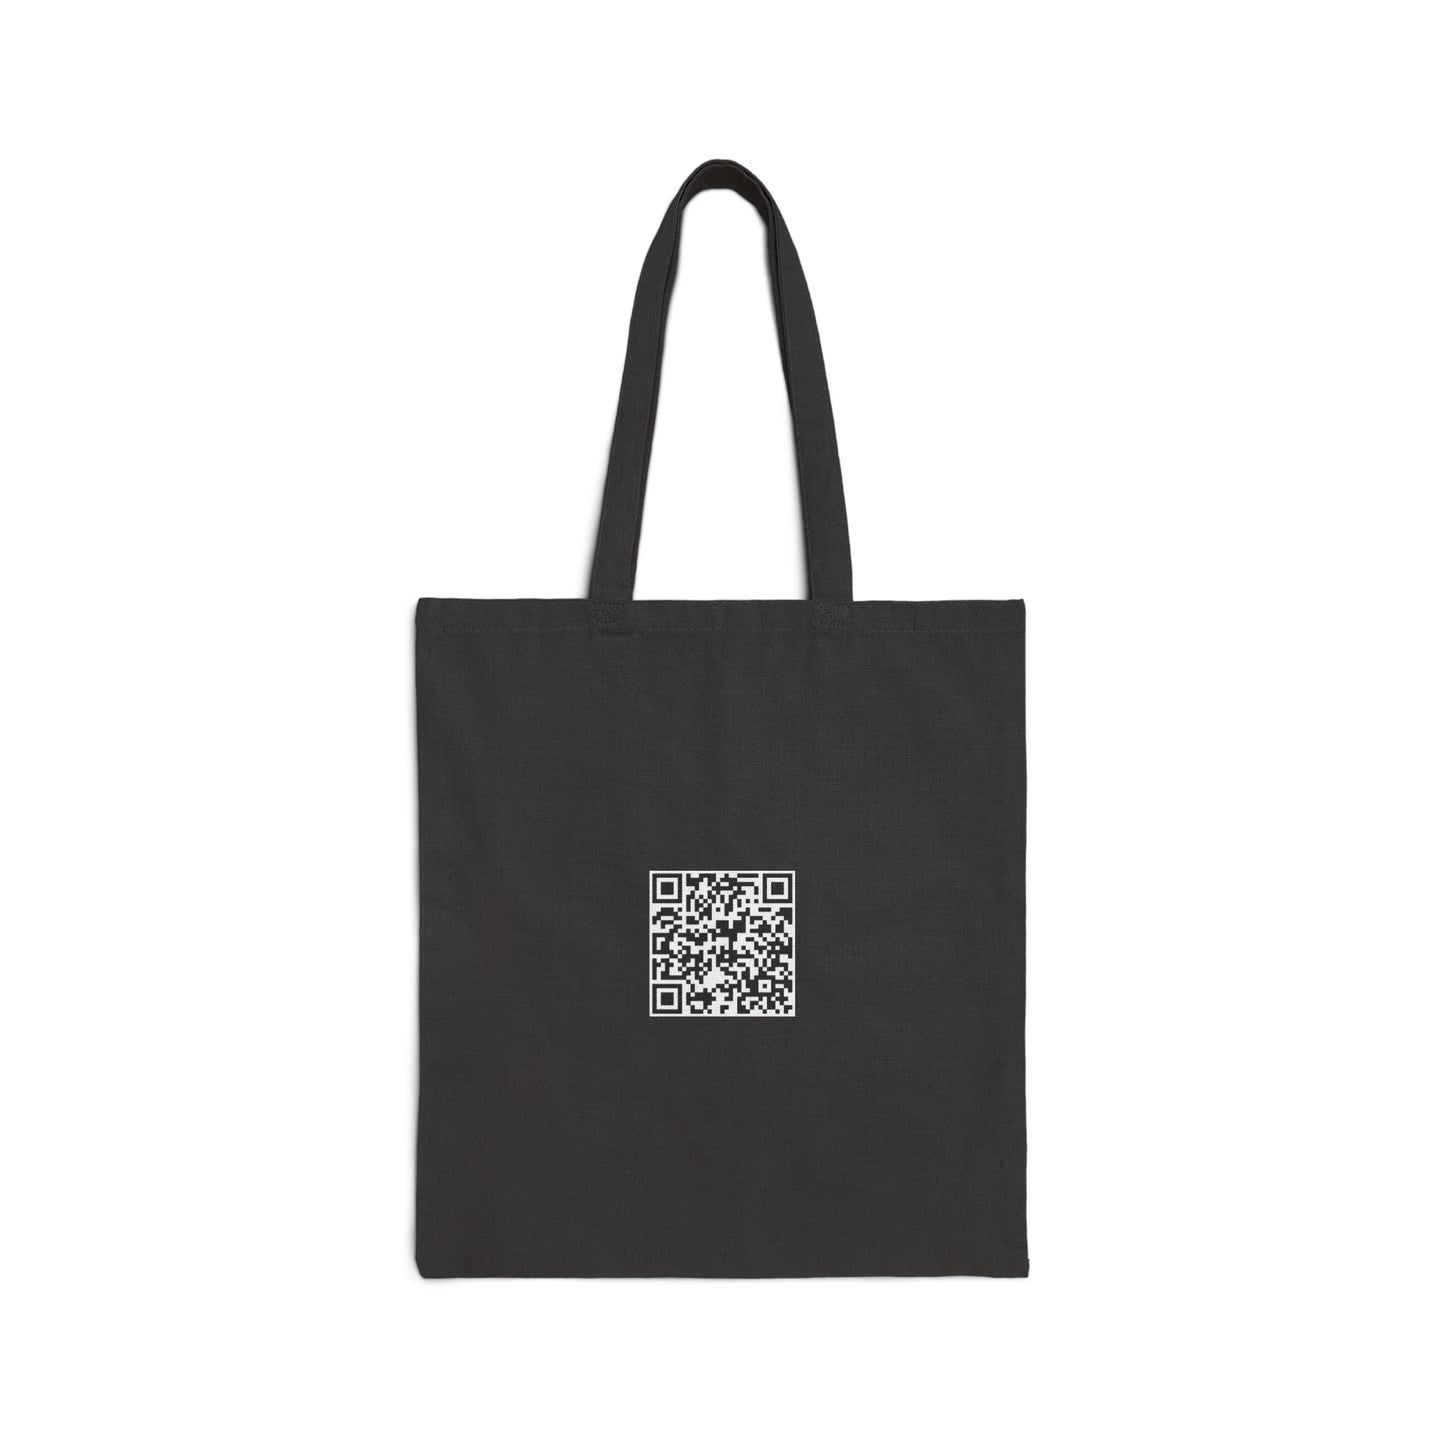 The Adventures Of A Travelling Cat - Cotton Canvas Tote Bag